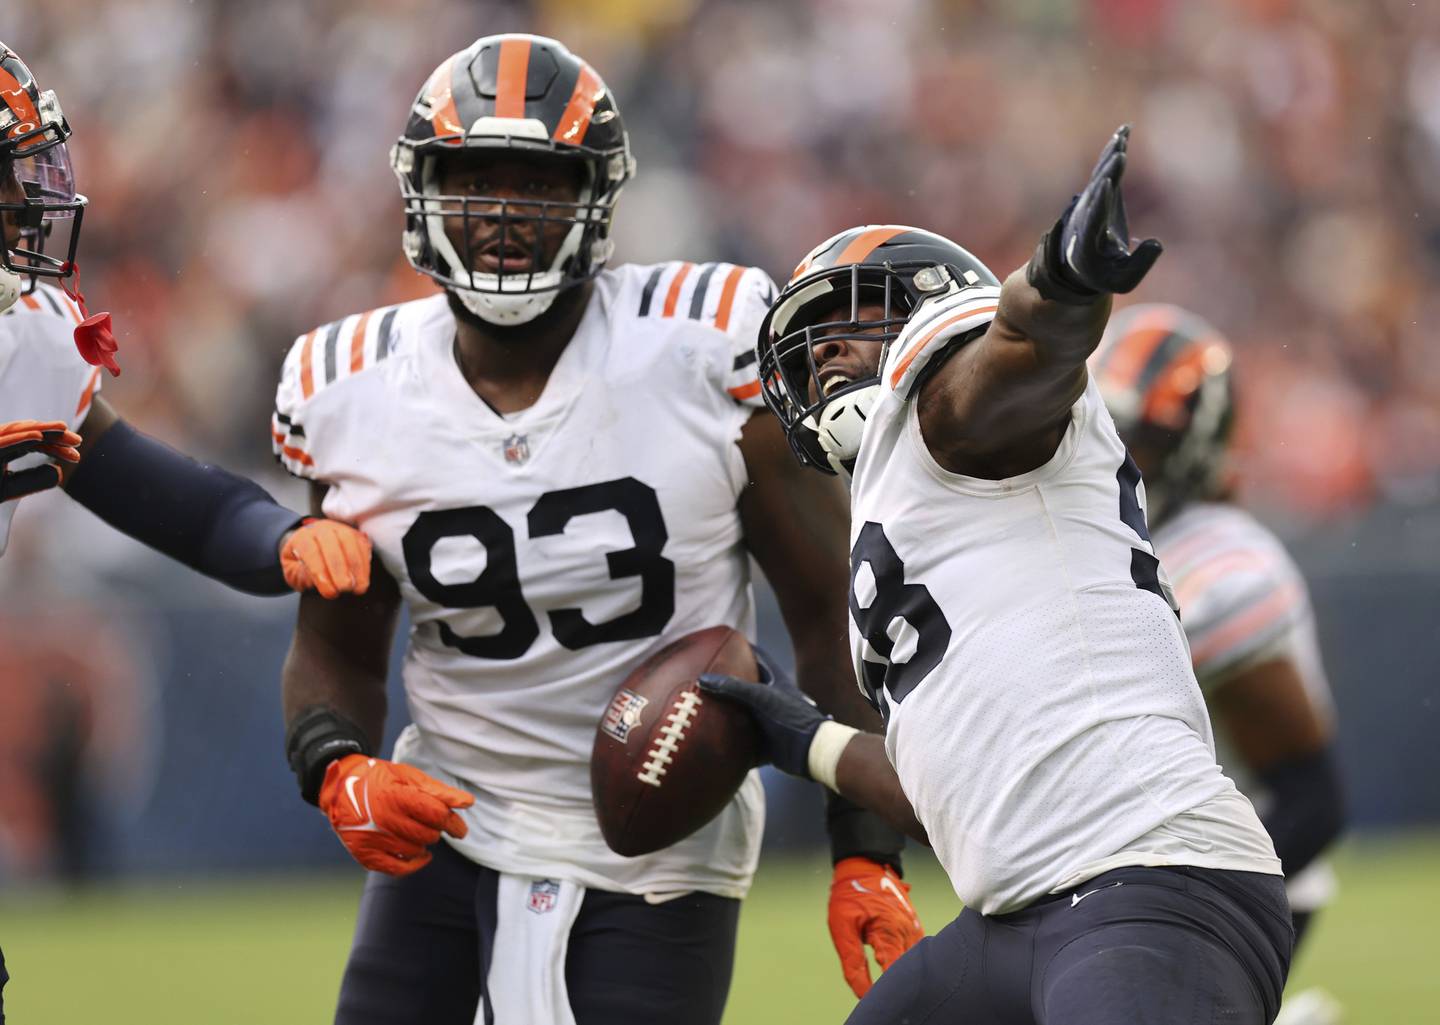 Bears linebacker Roquan Smith (58) celebrates after his interception in the fourth quarter against the Texans on Sept. 25, 2022, at Soldier Field.